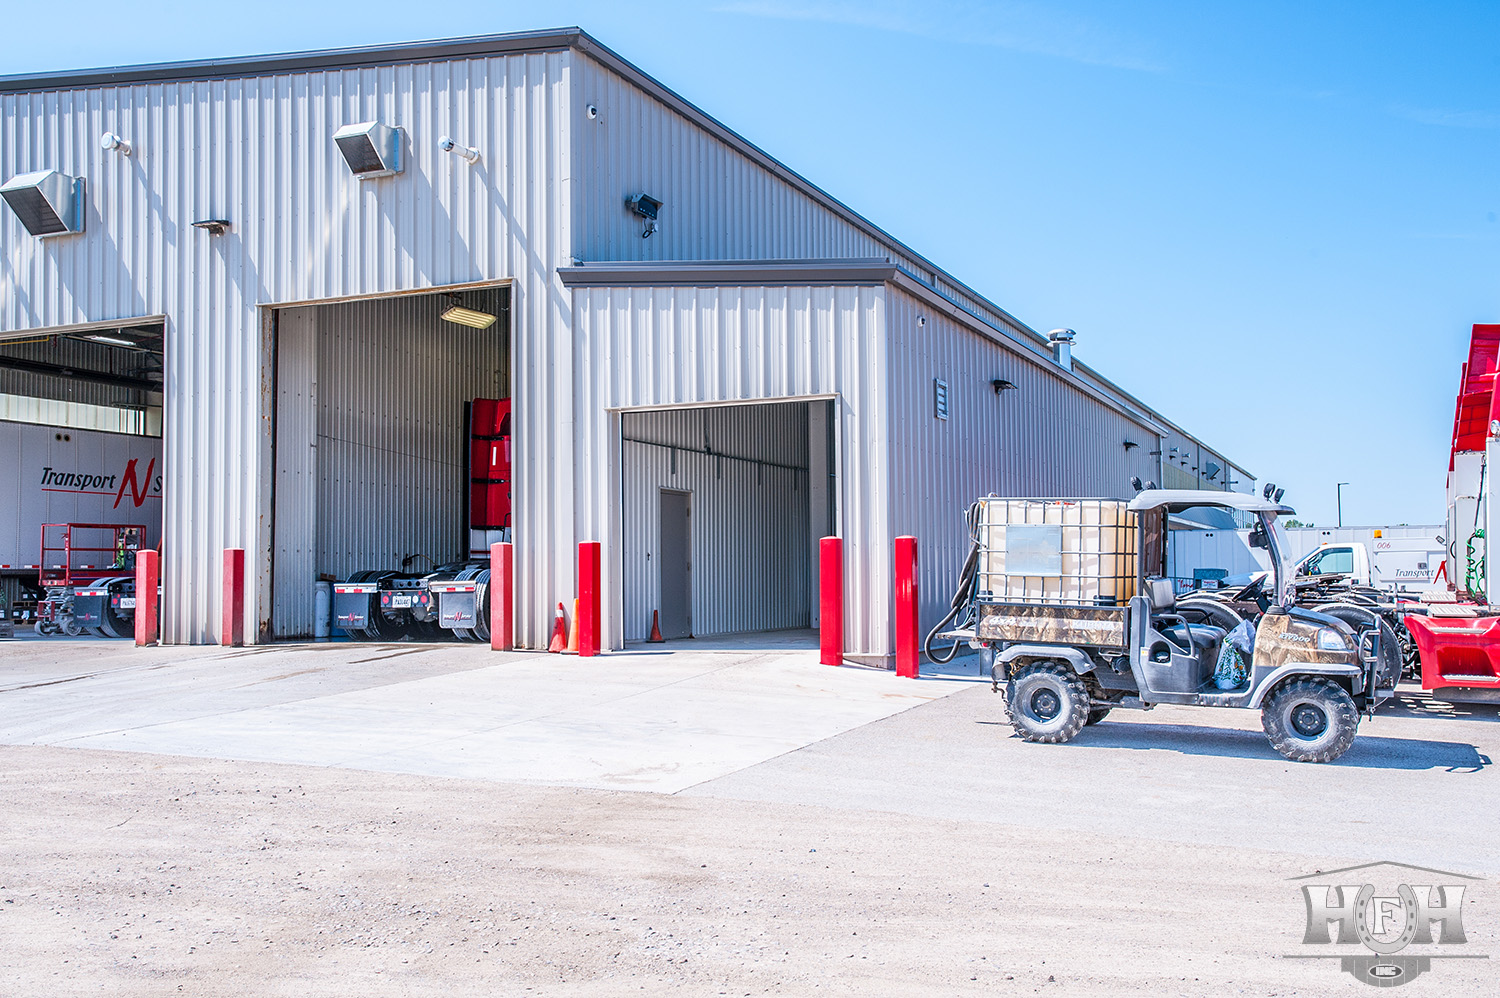 Exterior commercial building with 3 freight garages